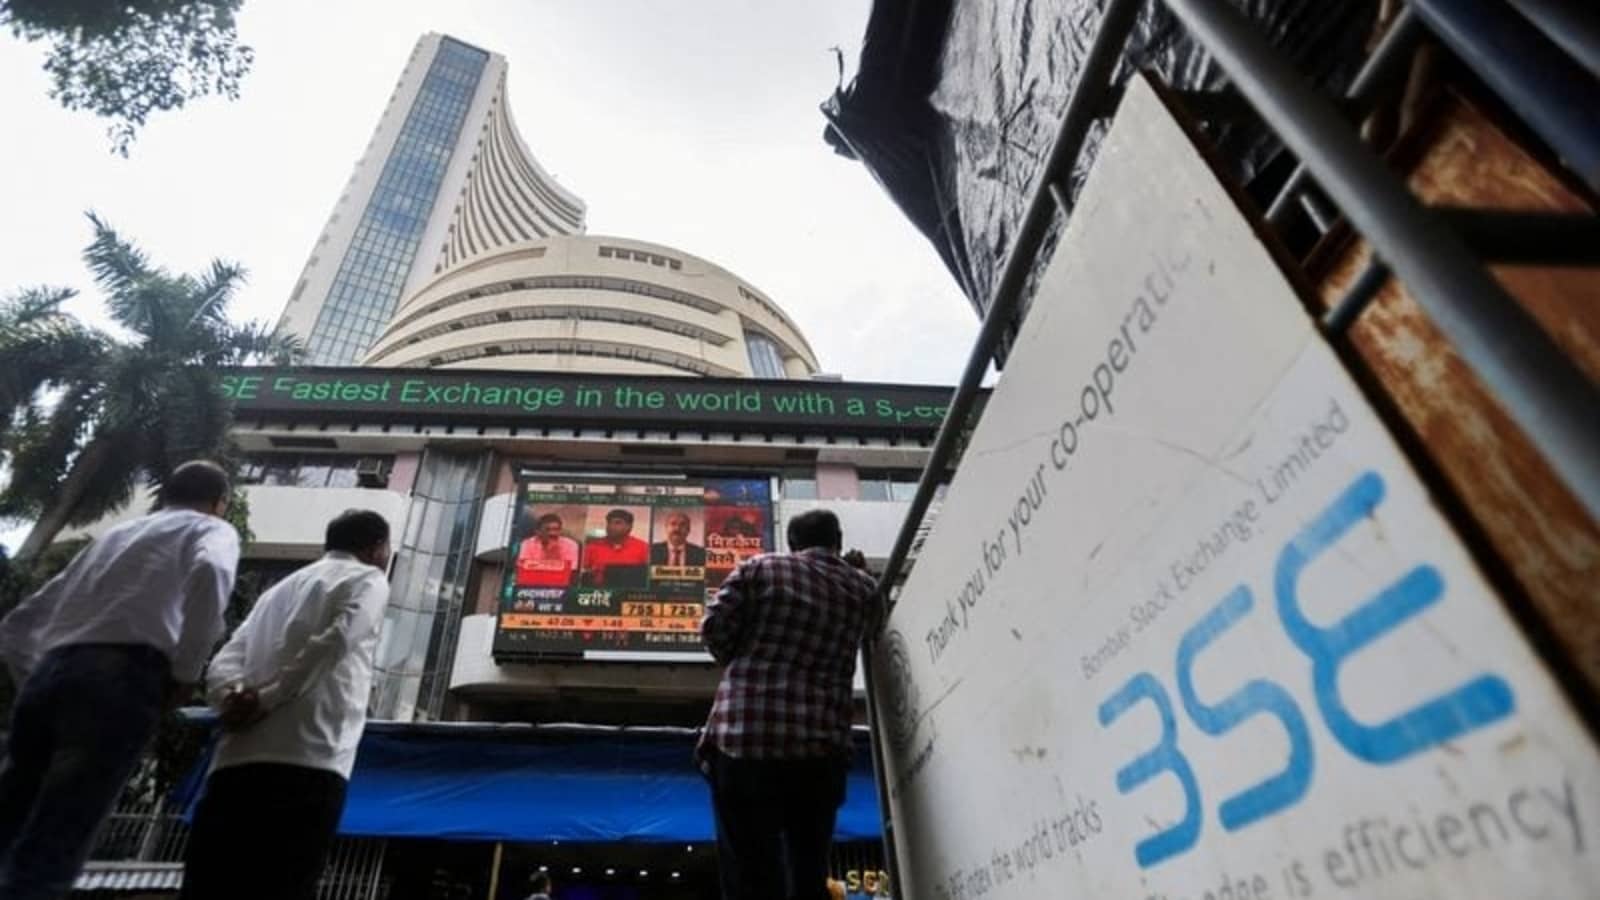 Sensex tanks over 2,700 pts in line with global impact as Russia invades Ukraine